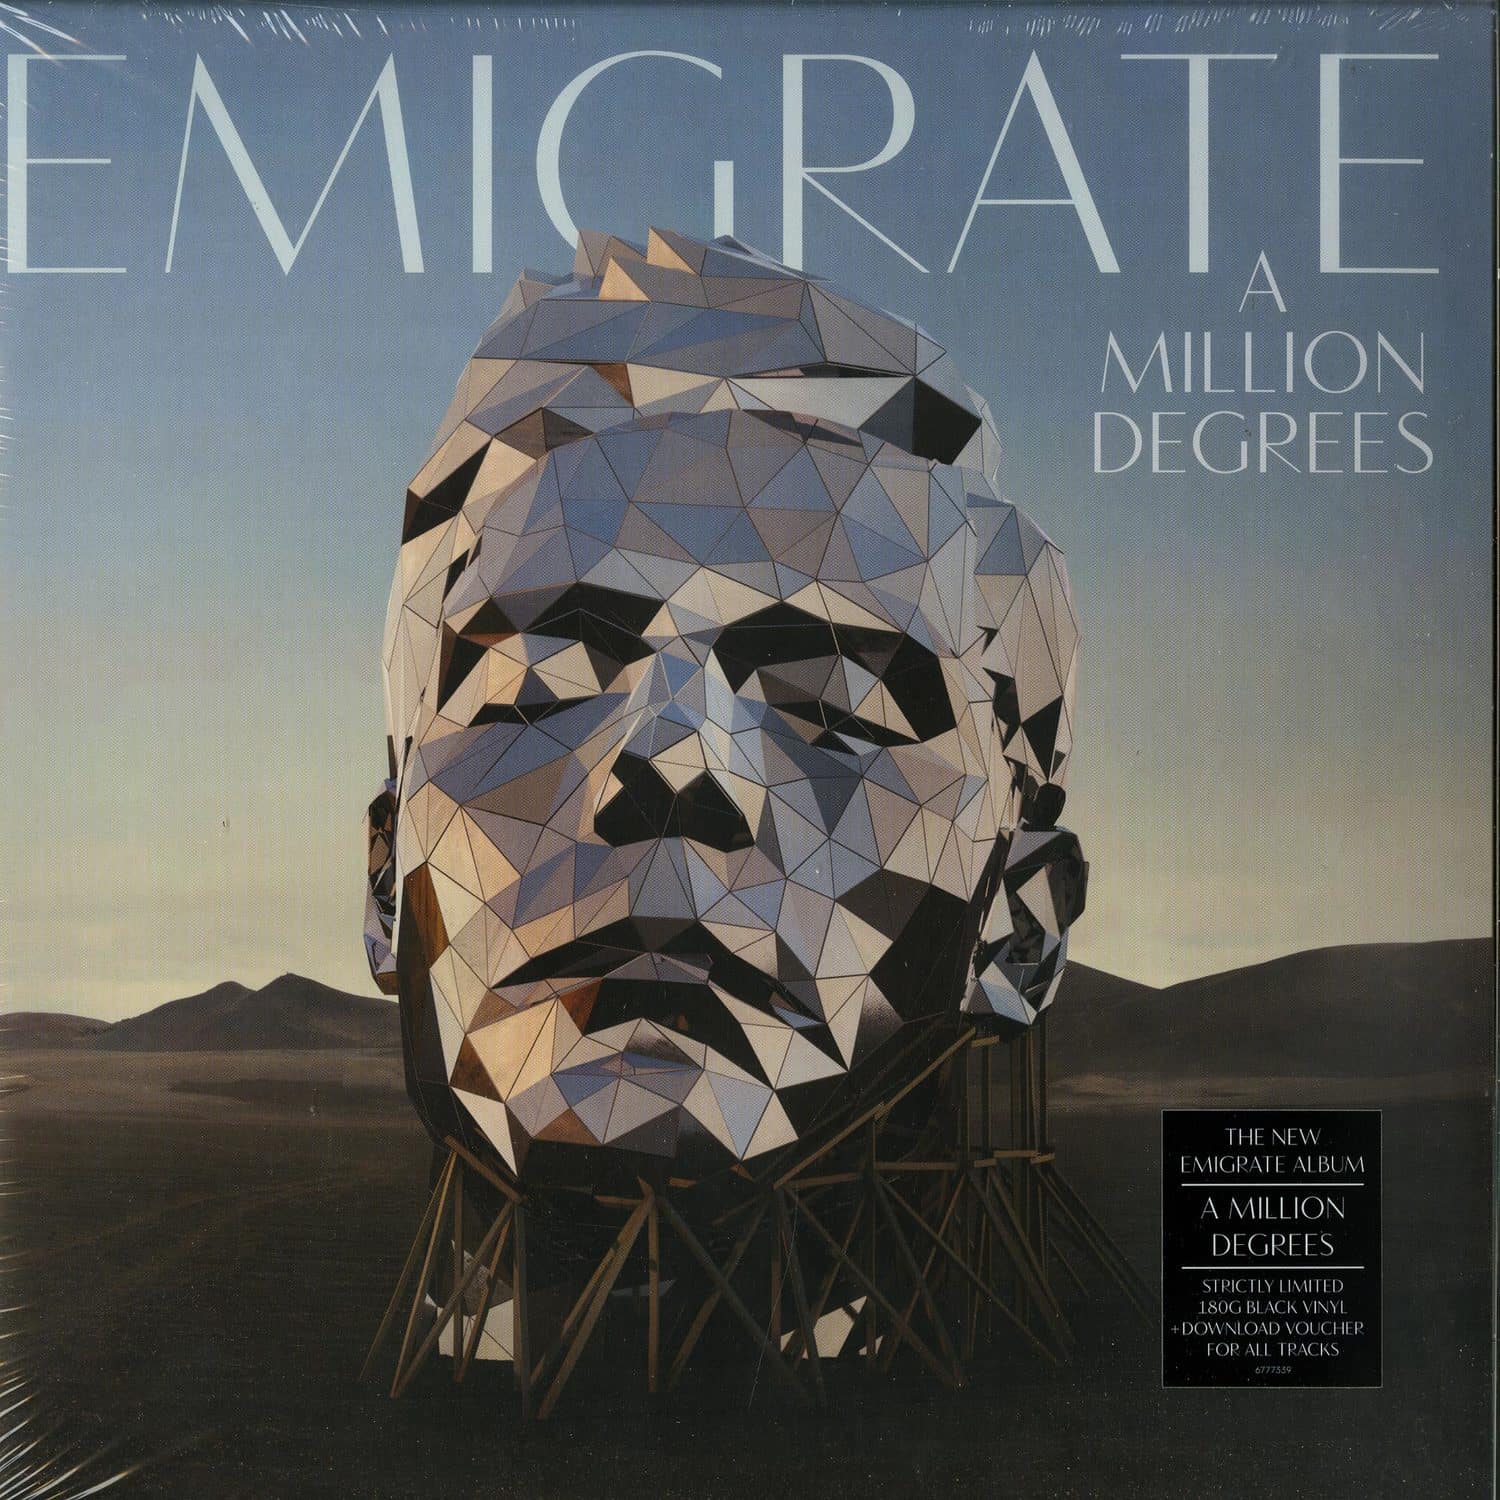 Emigrate - A MILLION DEGREES 